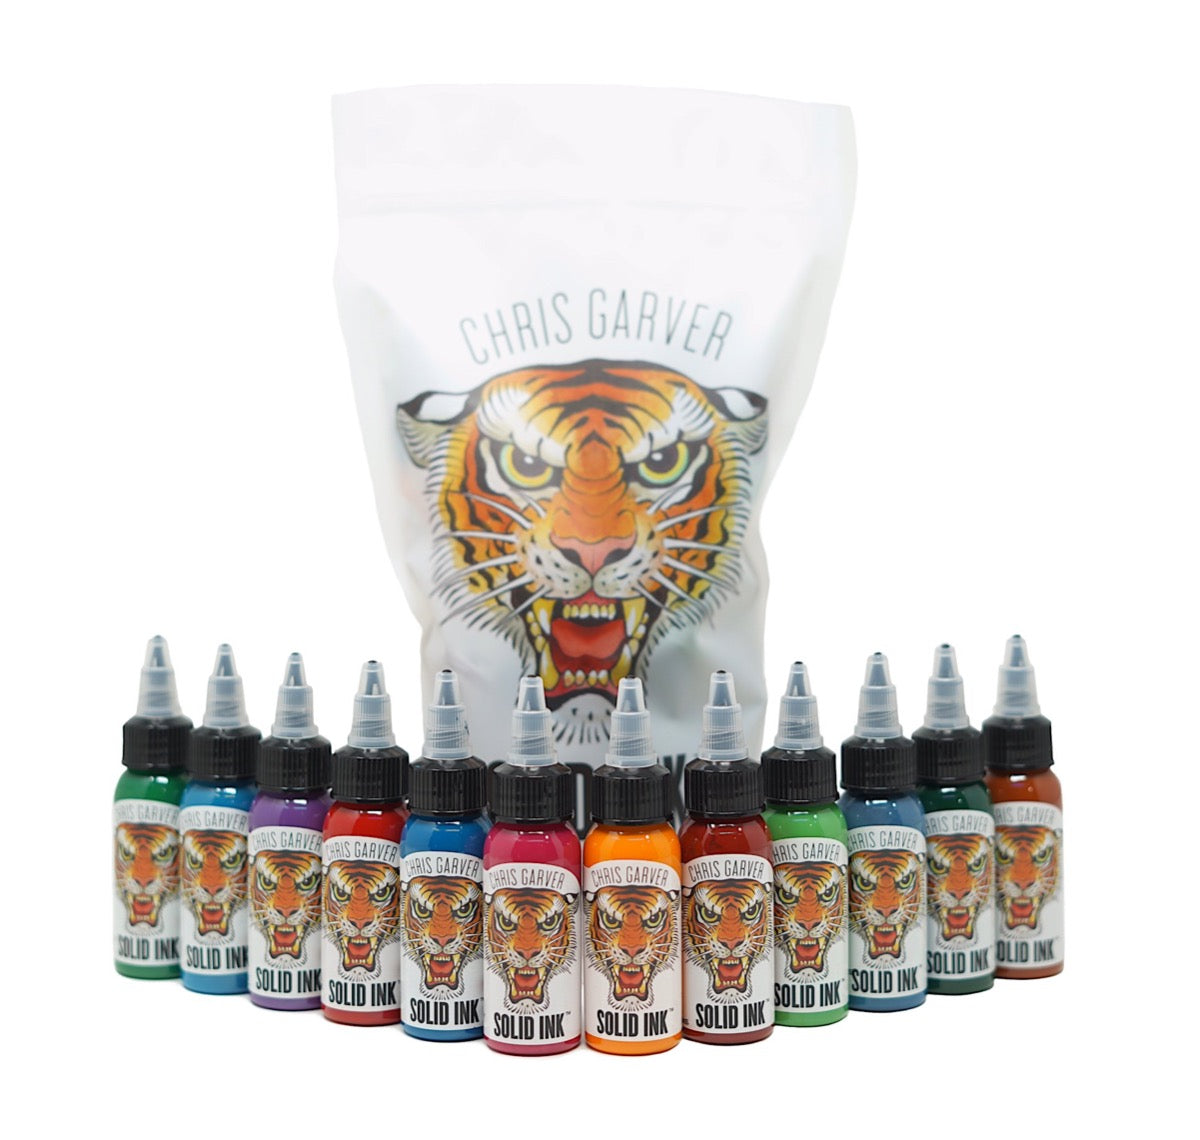 Chris Garver 1oz Set | 12 Colors (12 for the price of 10)